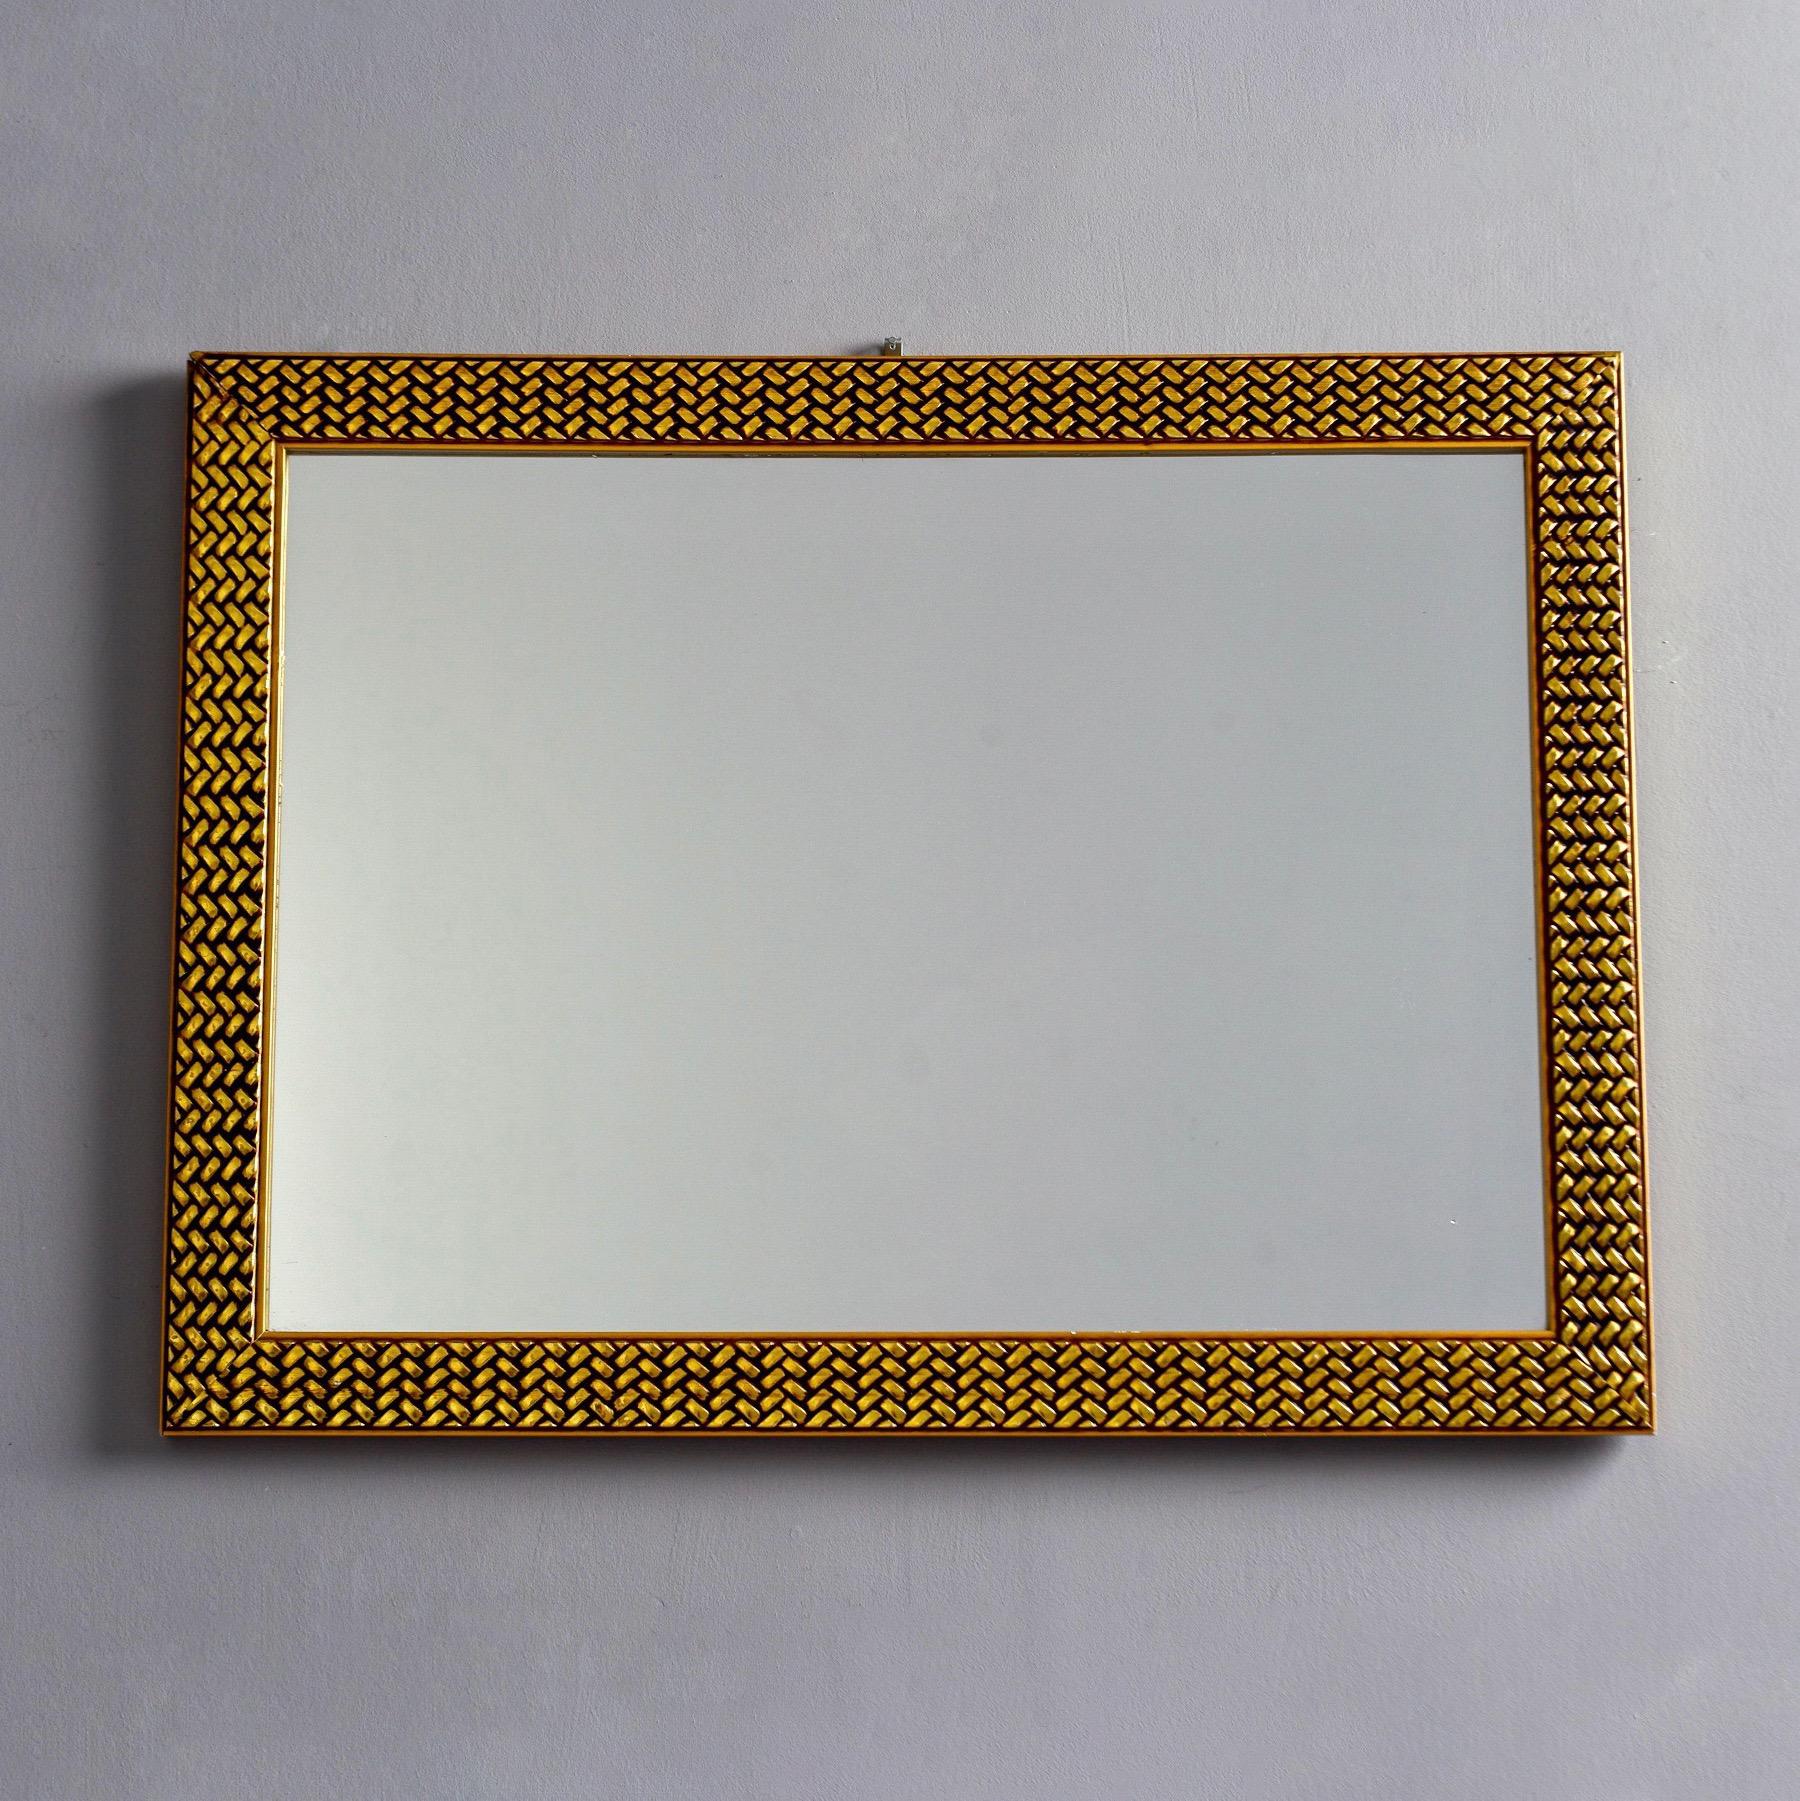 Found in France, this circa 1970s rectangular mirror has a basket weave textured frame and brass-like finish. Unknown maker. Wired to hang vertically or horizontally. 

Actual mirror size: 18.5” high x 27” wide.
  